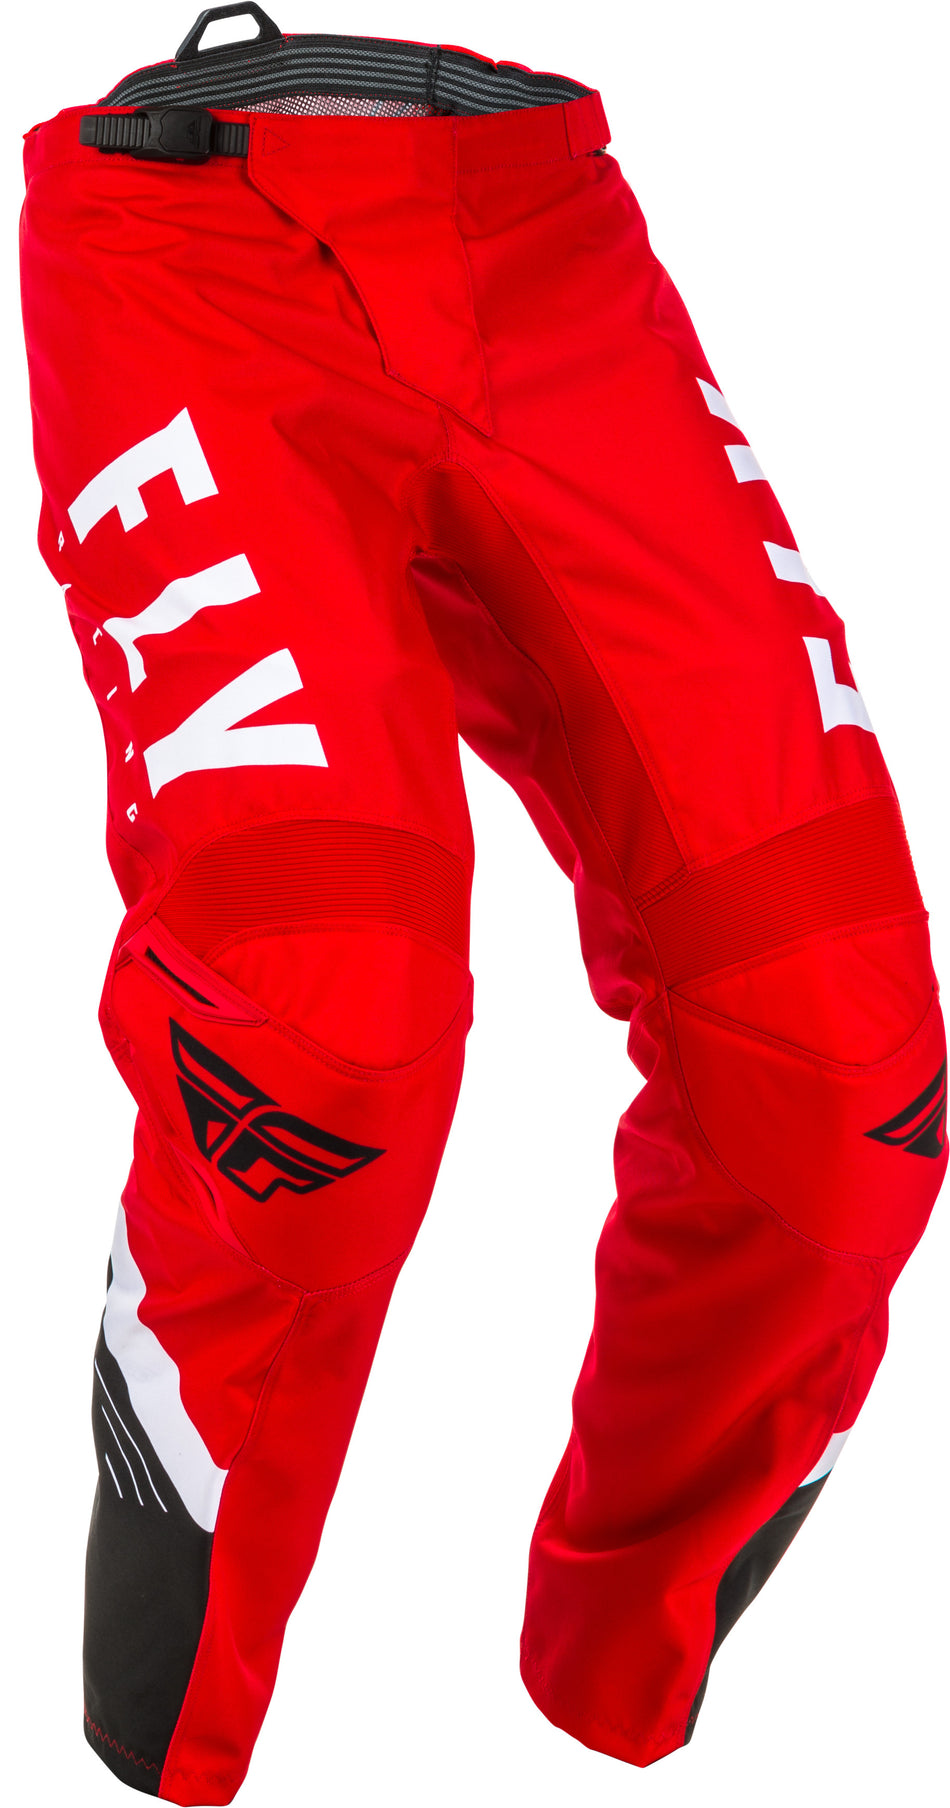 FLY RACING F-16 Pants Red/Black/White Sz 40 373-93340